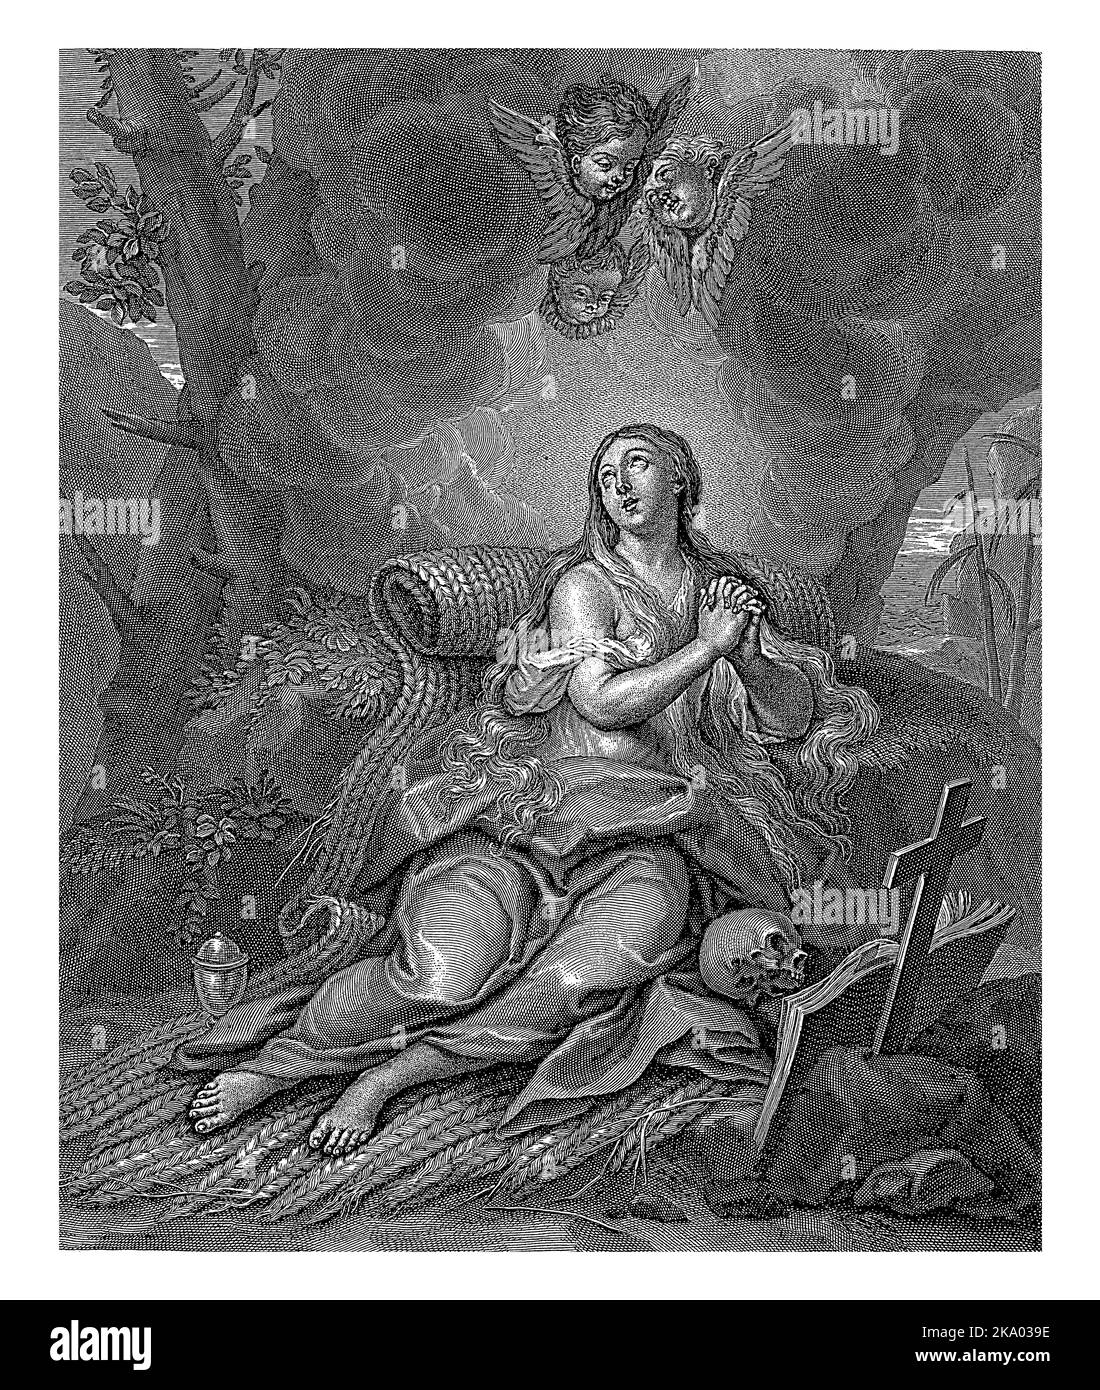 Praying Mary Magdalene, Claude I Duflos, after Antoine Dieu, 1675 - 1727, vintage engraved. Stock Photo